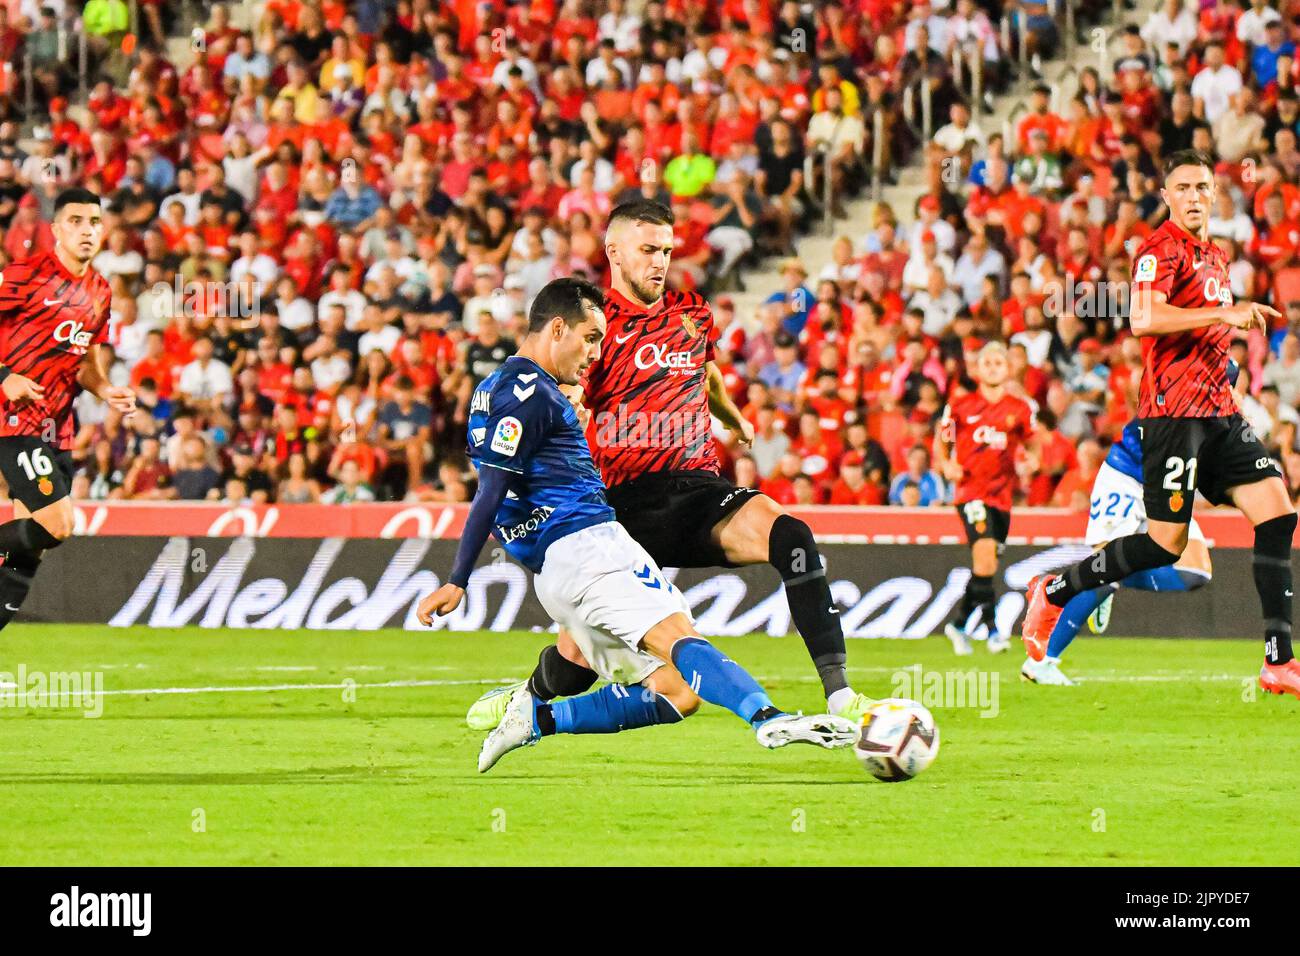 MALLORCA, SPAIN - AUGUST 20: Juanmi of Real Betis in the match between RCD Mallorca and Real Betis of La Liga Santander on August 20, 2022 at Visit Mallorca Stadium Son Moix in Mallorca, Spain. (Photo by Samuel Carreño/PxImages) Stock Photo